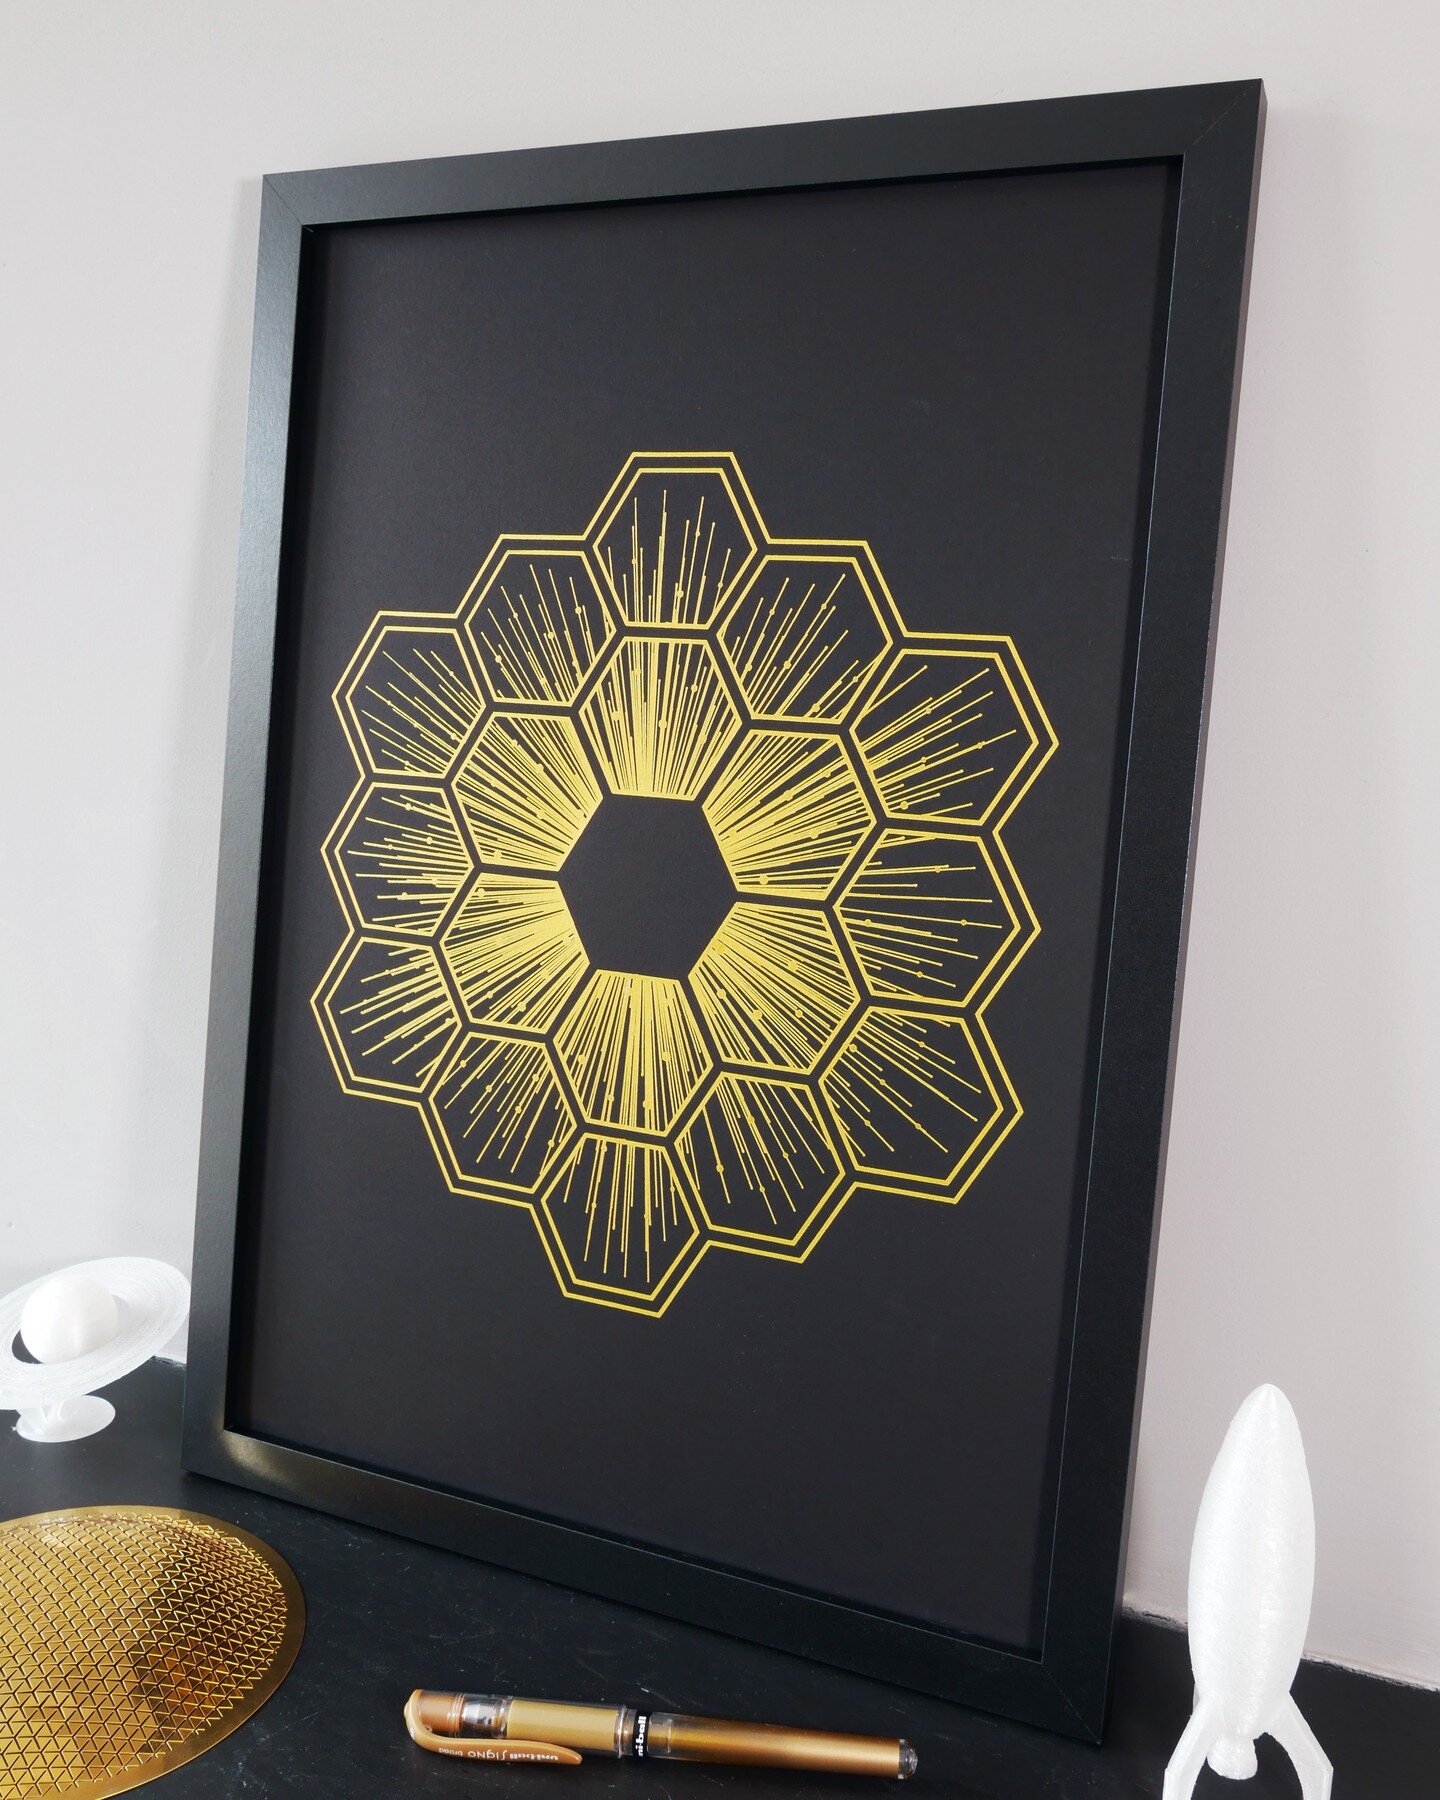 James Webb Space Telescope (JWST)

Back by popular demand, I created a larger JWST piece, with the iconic hexagonal golden mirrors as the focus of the image. The minimalist pieces captures a reflection of the cosmos being observed by the Telescope.

